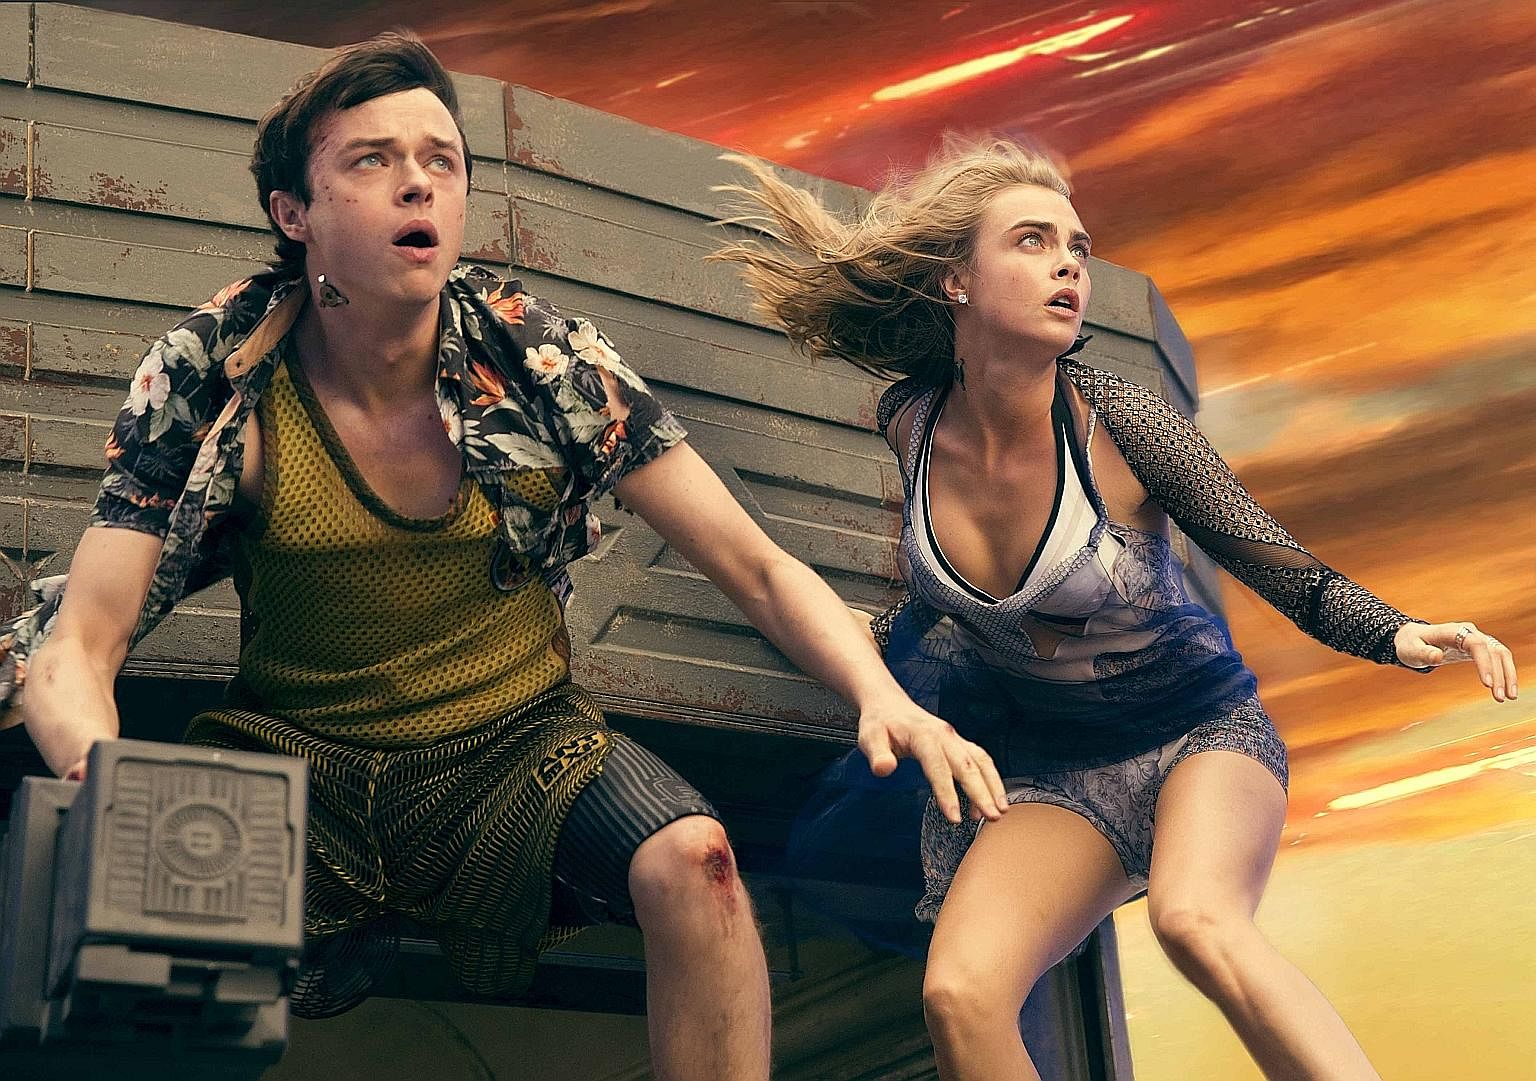 Dane DeHaan and Cara Delevingne (both above) play a sourpuss-and-slob odd couple in Valerian And The City Of A Thousand Planets, while Suki Waterhouse stars in The Bad Batch.